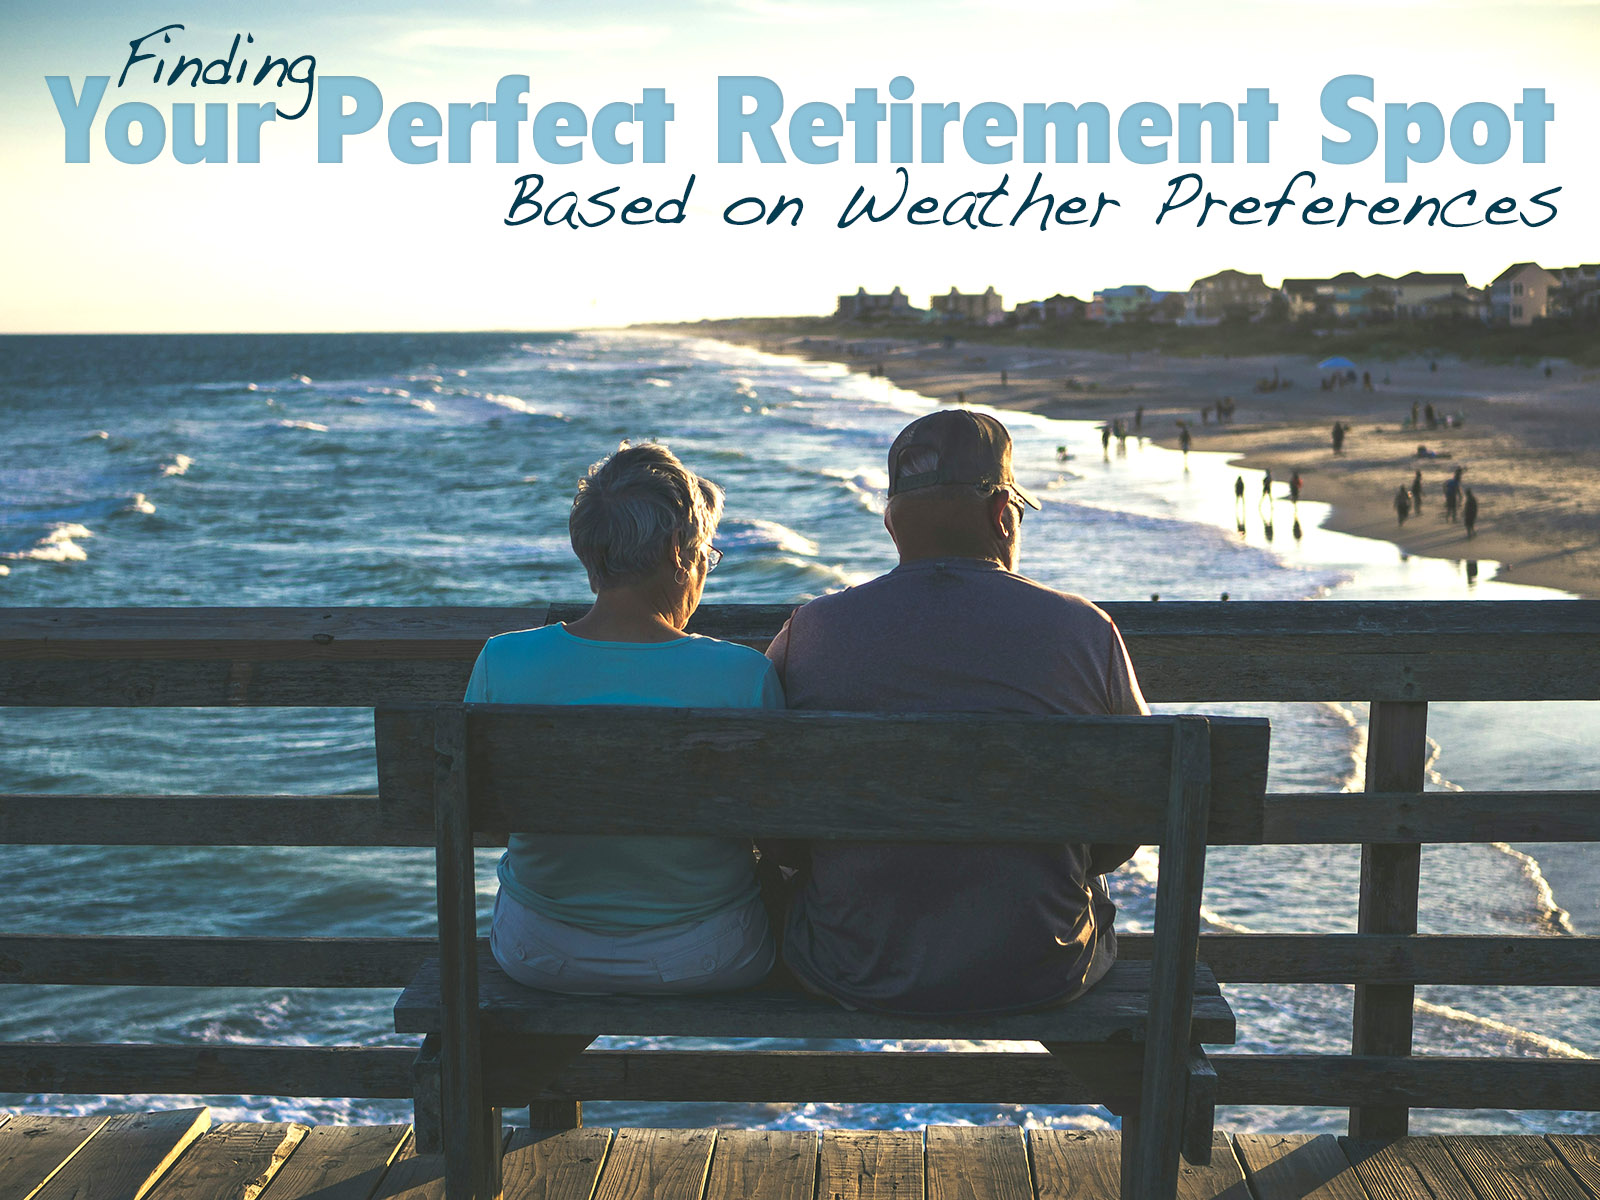 Finding Your Perfect Retirement Spot Based on Weather Preferences